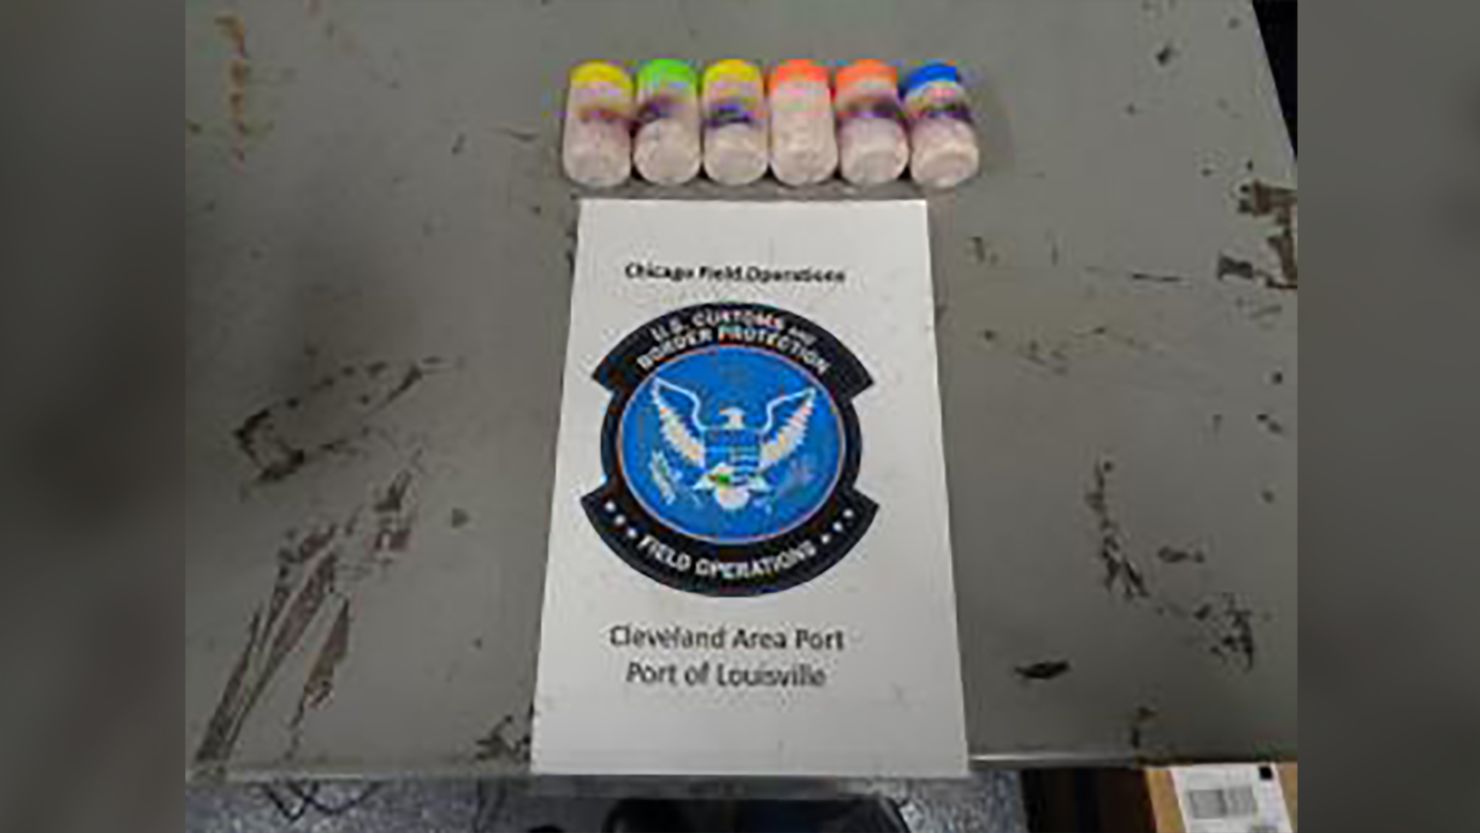 US Customs and Border Protection has seized a shipment of fentanyl hidden in pill bottles that was strong enough to potentially kill tens of thousands of people, the agency said.